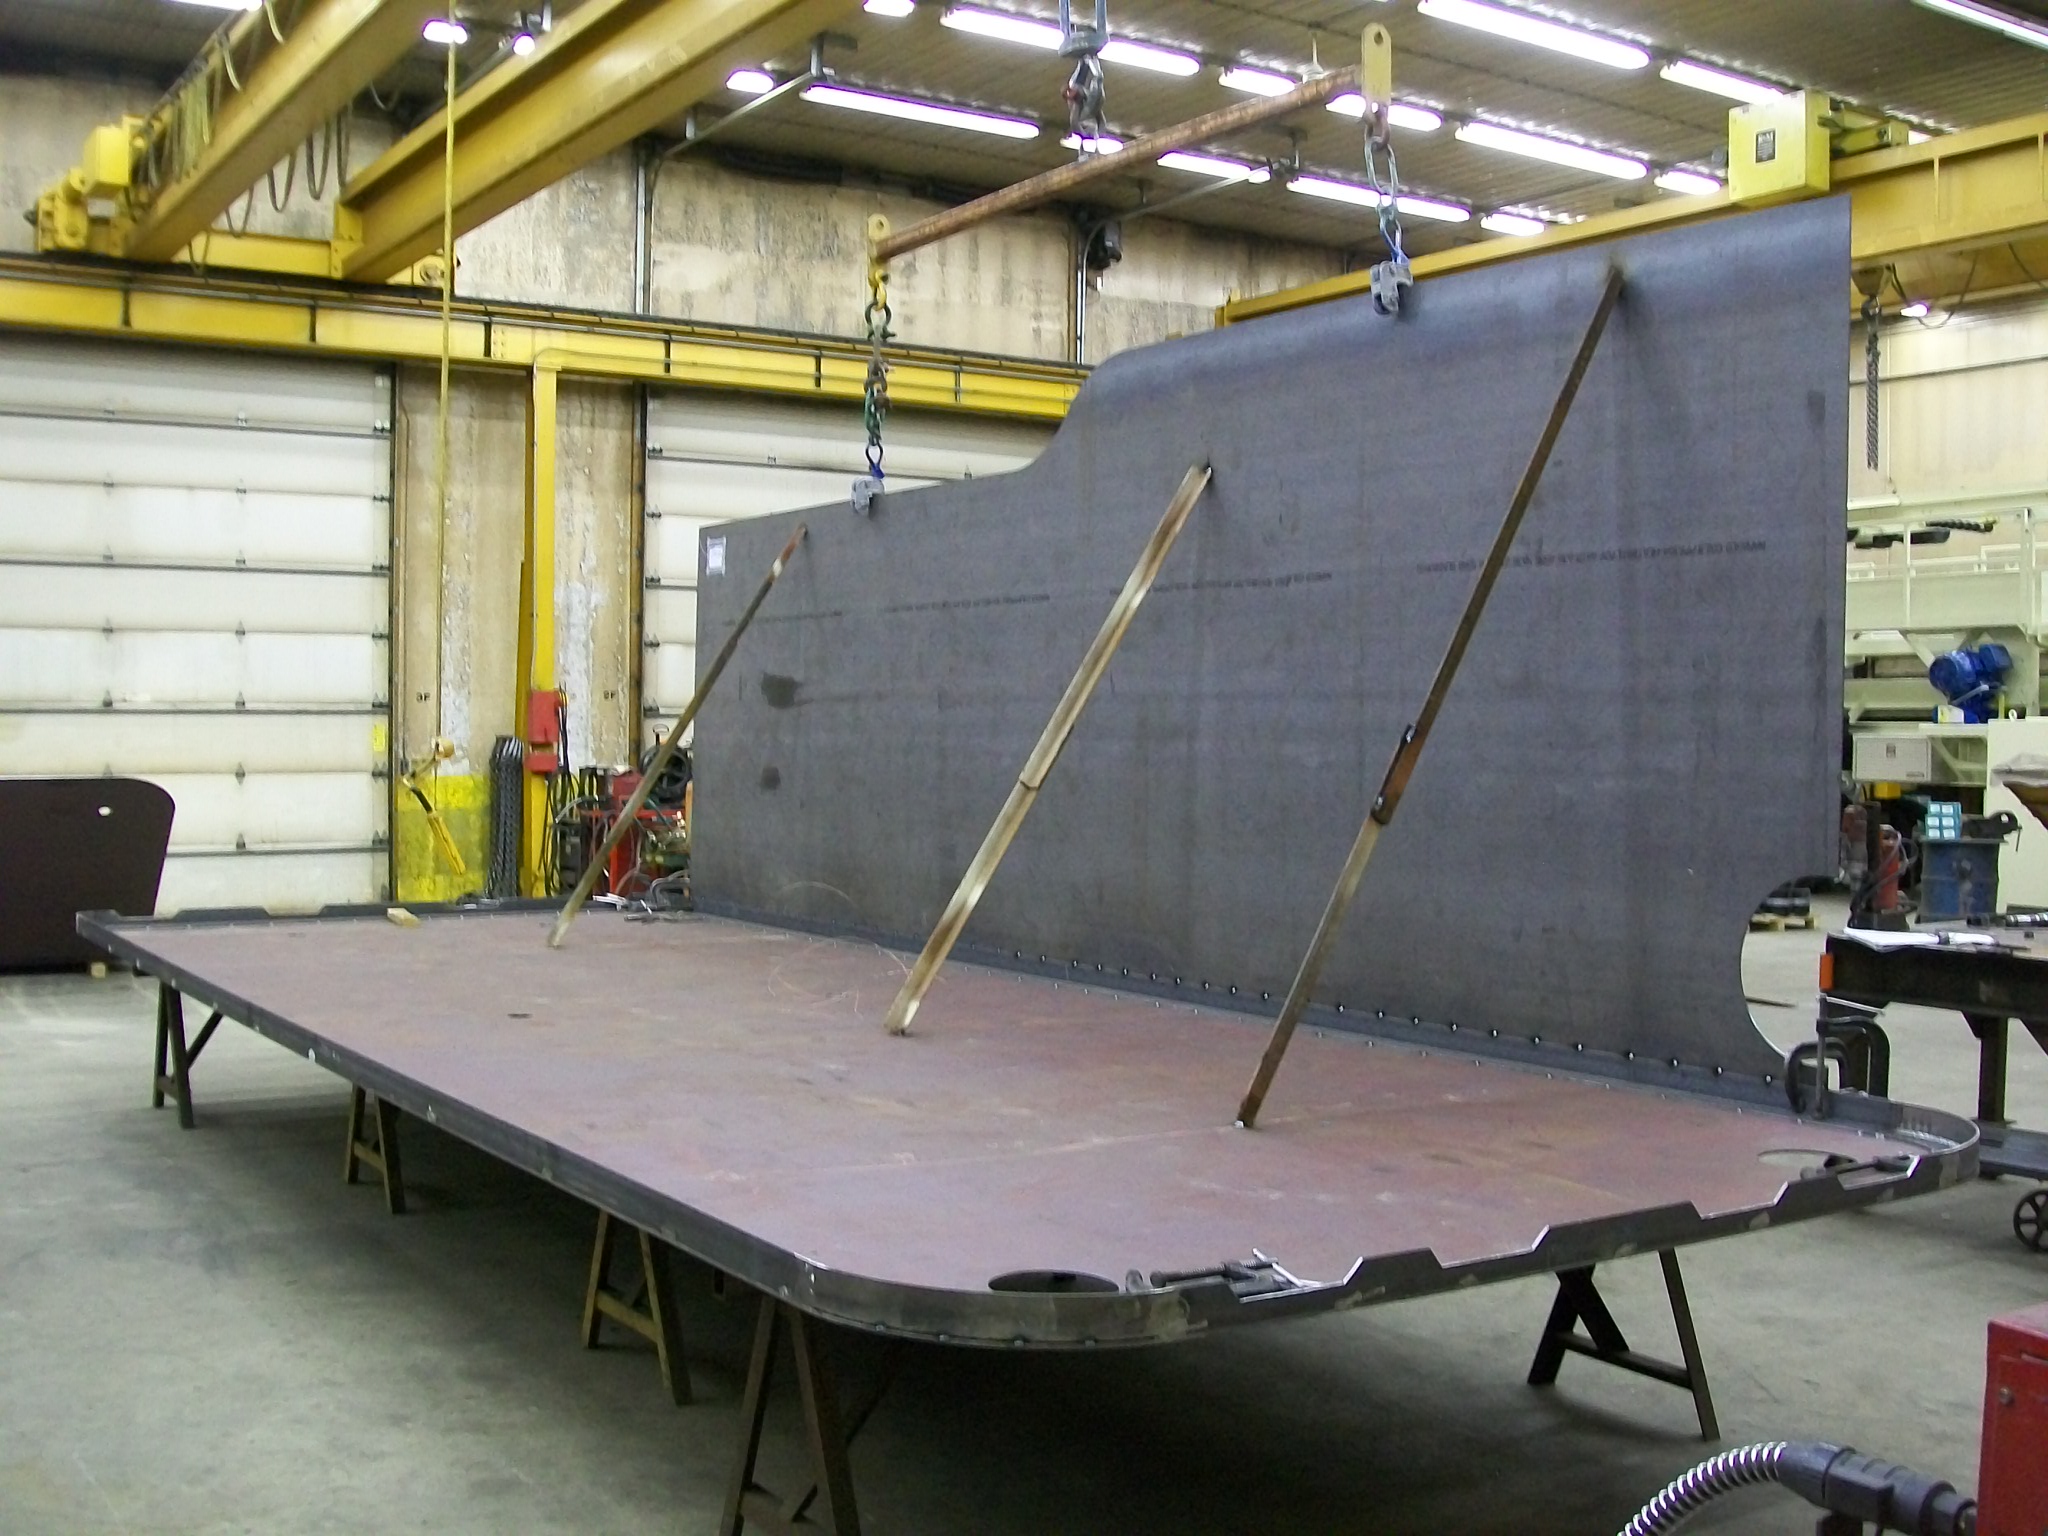 New C&NW 1385 tender tank under construction at DRM Industries in Lake Delton, Wis. Feb 10, 2012. Photo from DRM Industries.